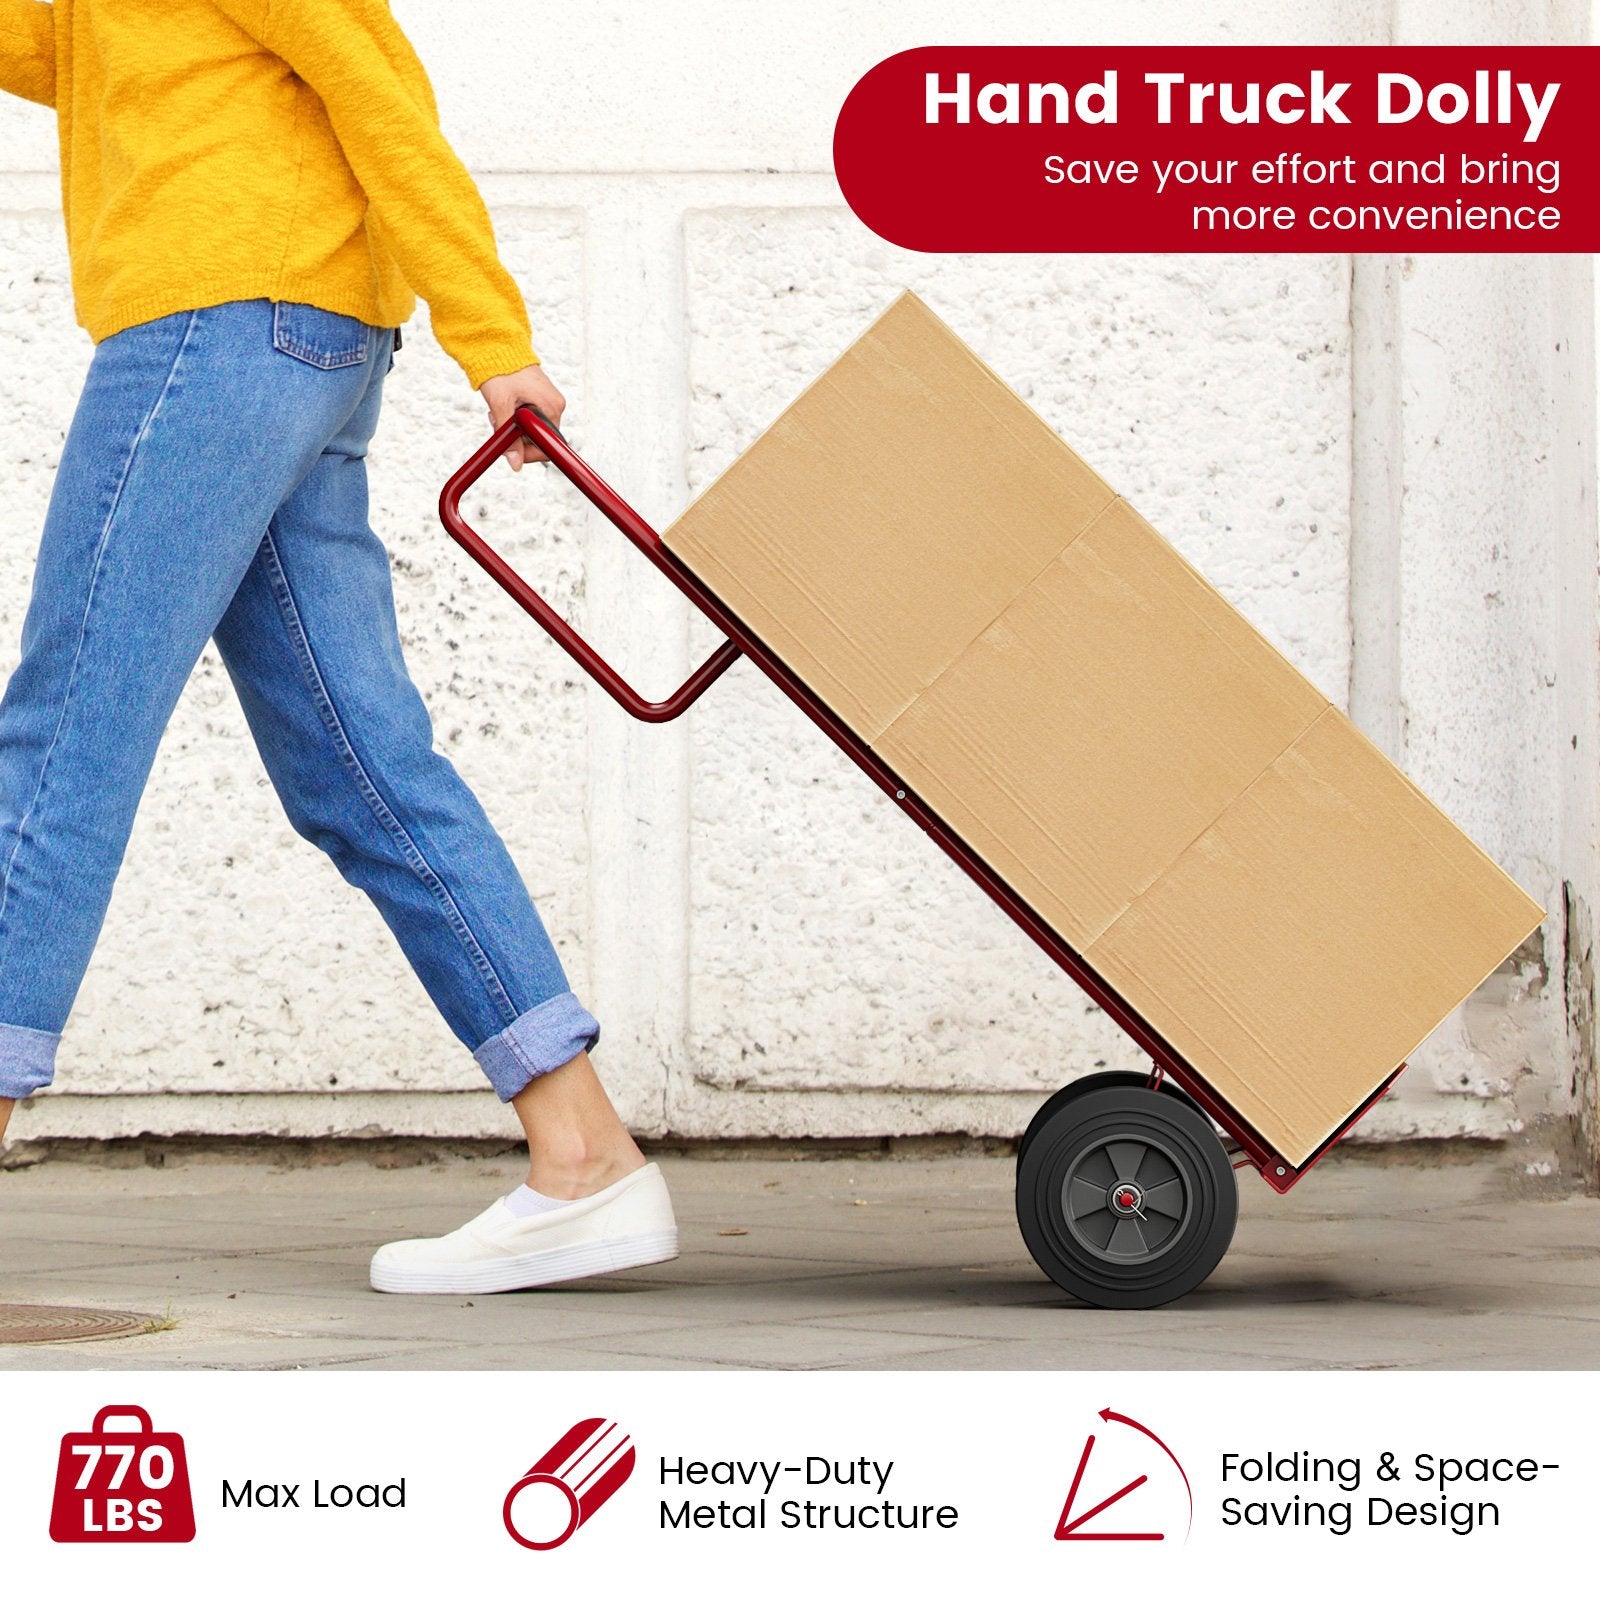 P-Handle Sack Truck with 10 Inch Wheels and Foldable Load Area, Red - Gallery Canada